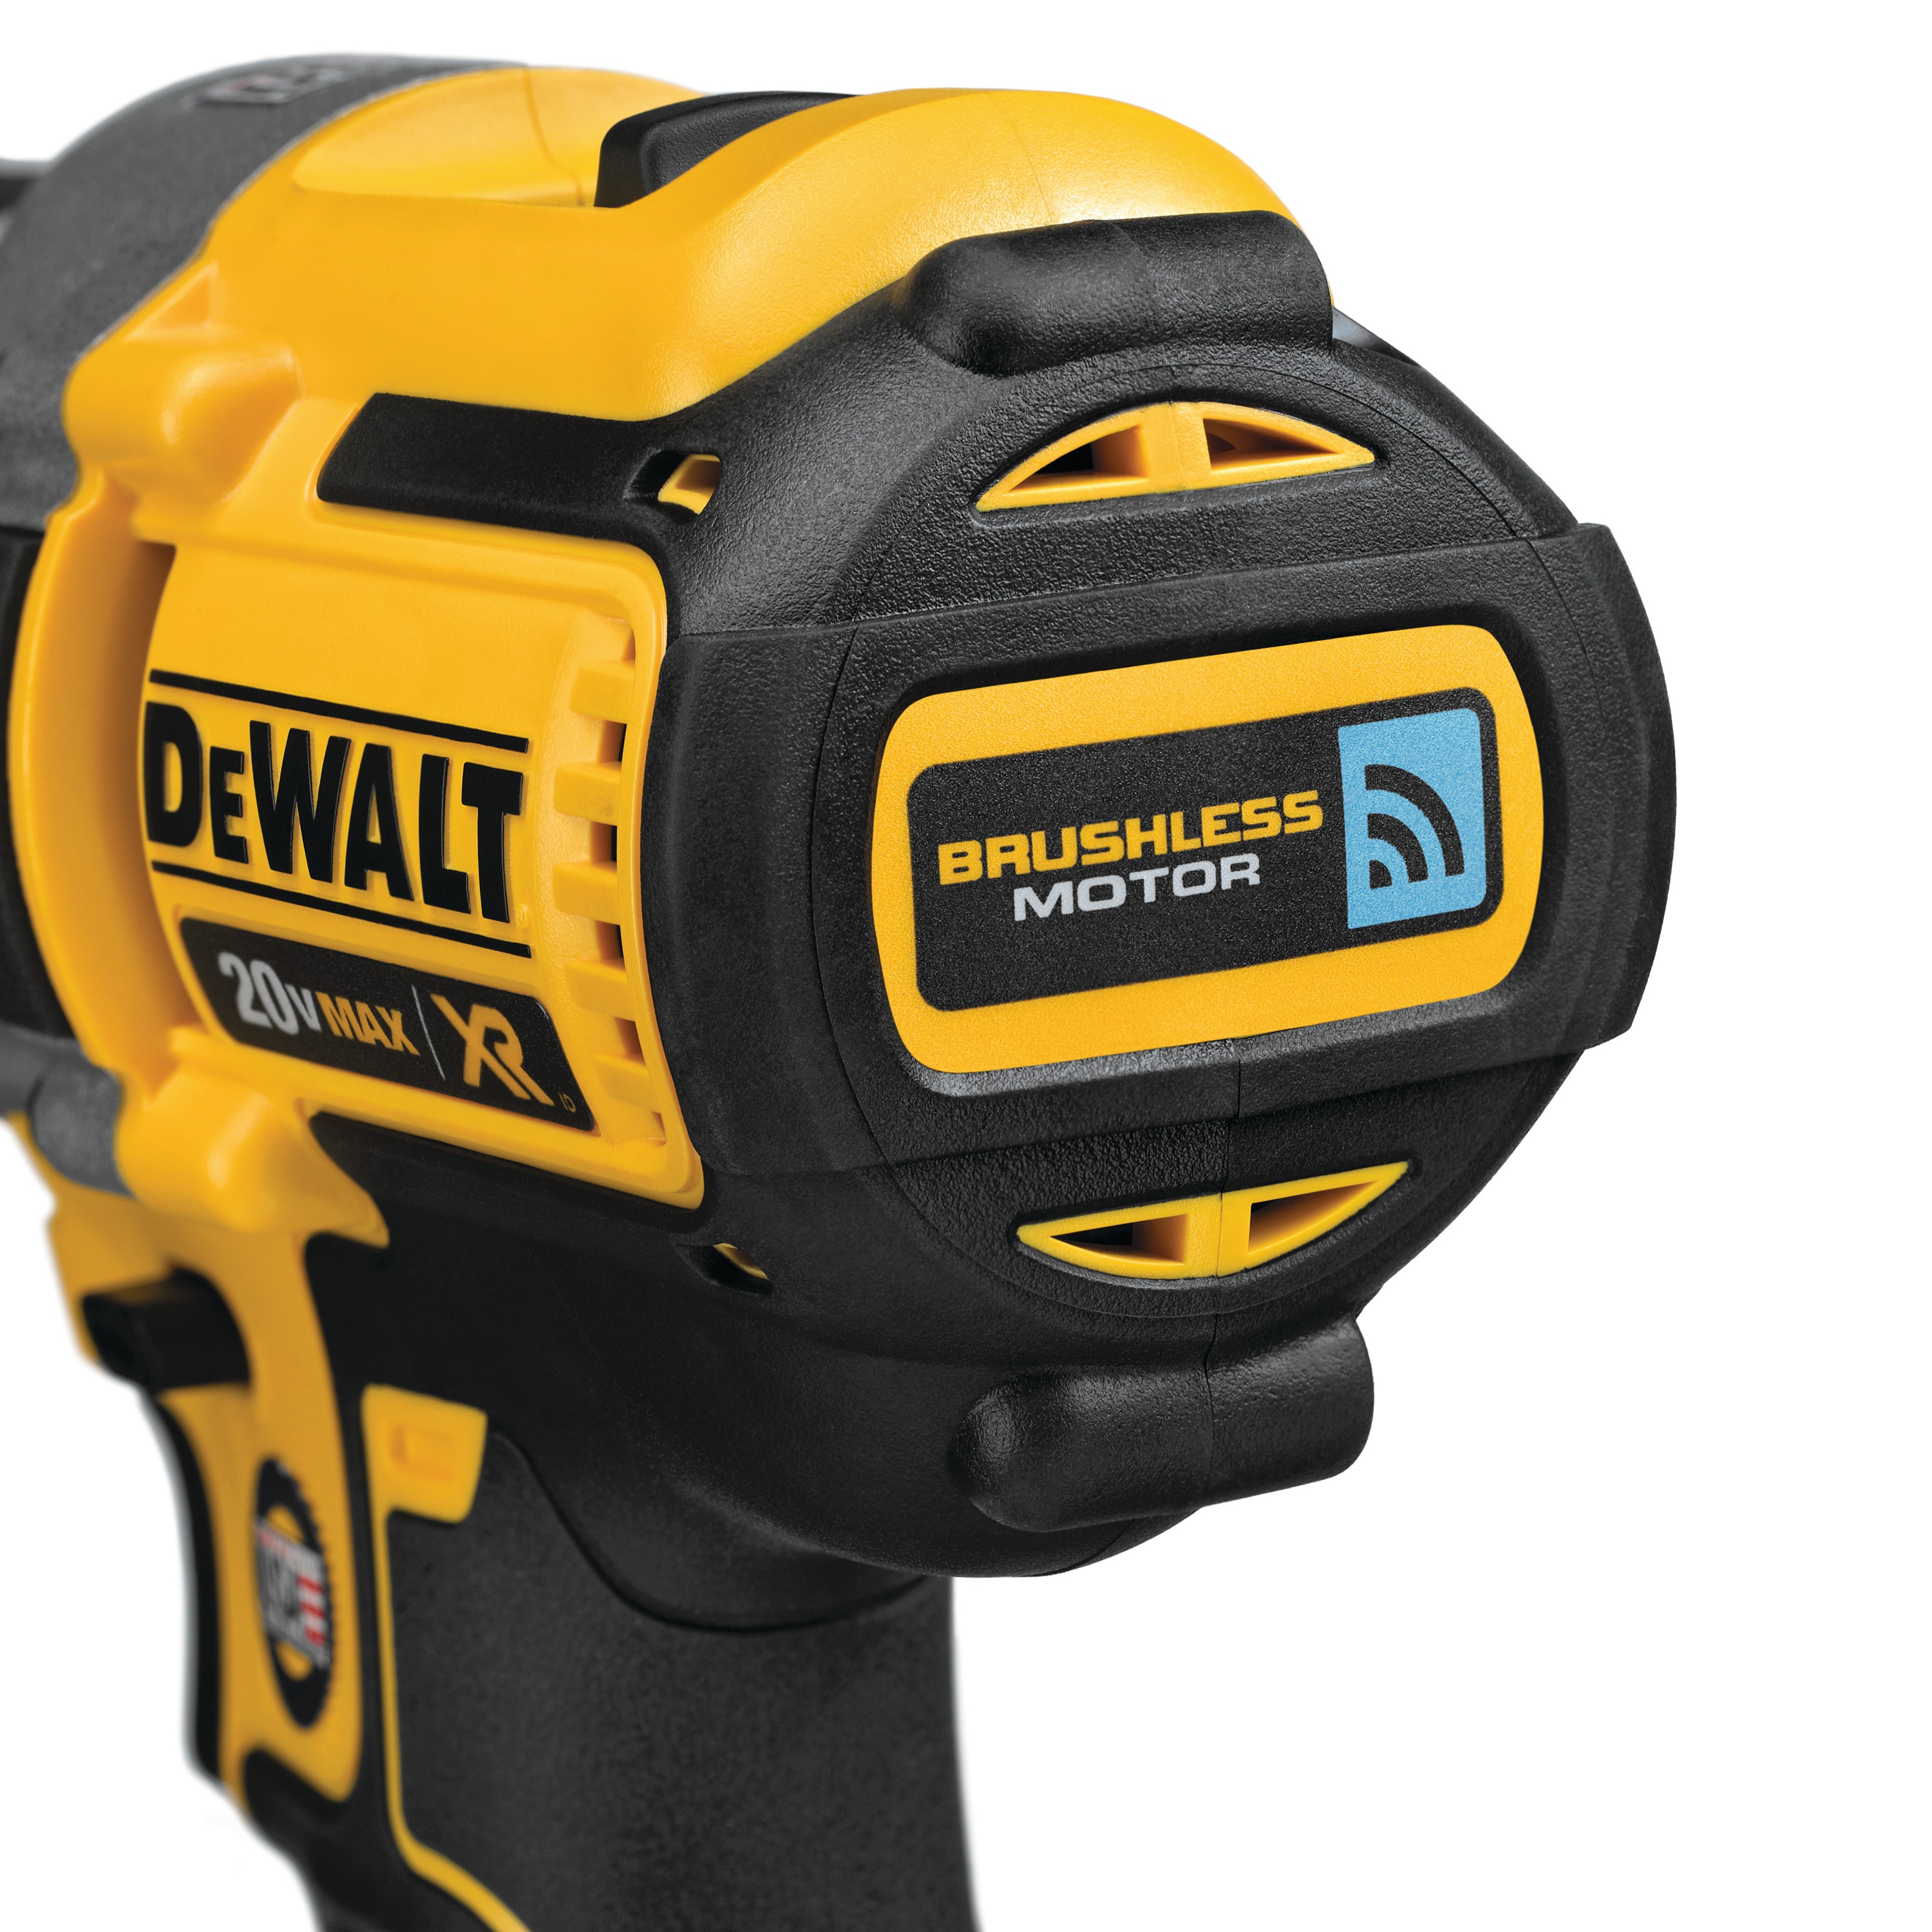 DEWALT - 20V MAX 12 in XR Brushless Cordless Hammer DrillDriver Kit with Integrated Bluetooth and Tool Connect Batteries - DCD997CP2BT